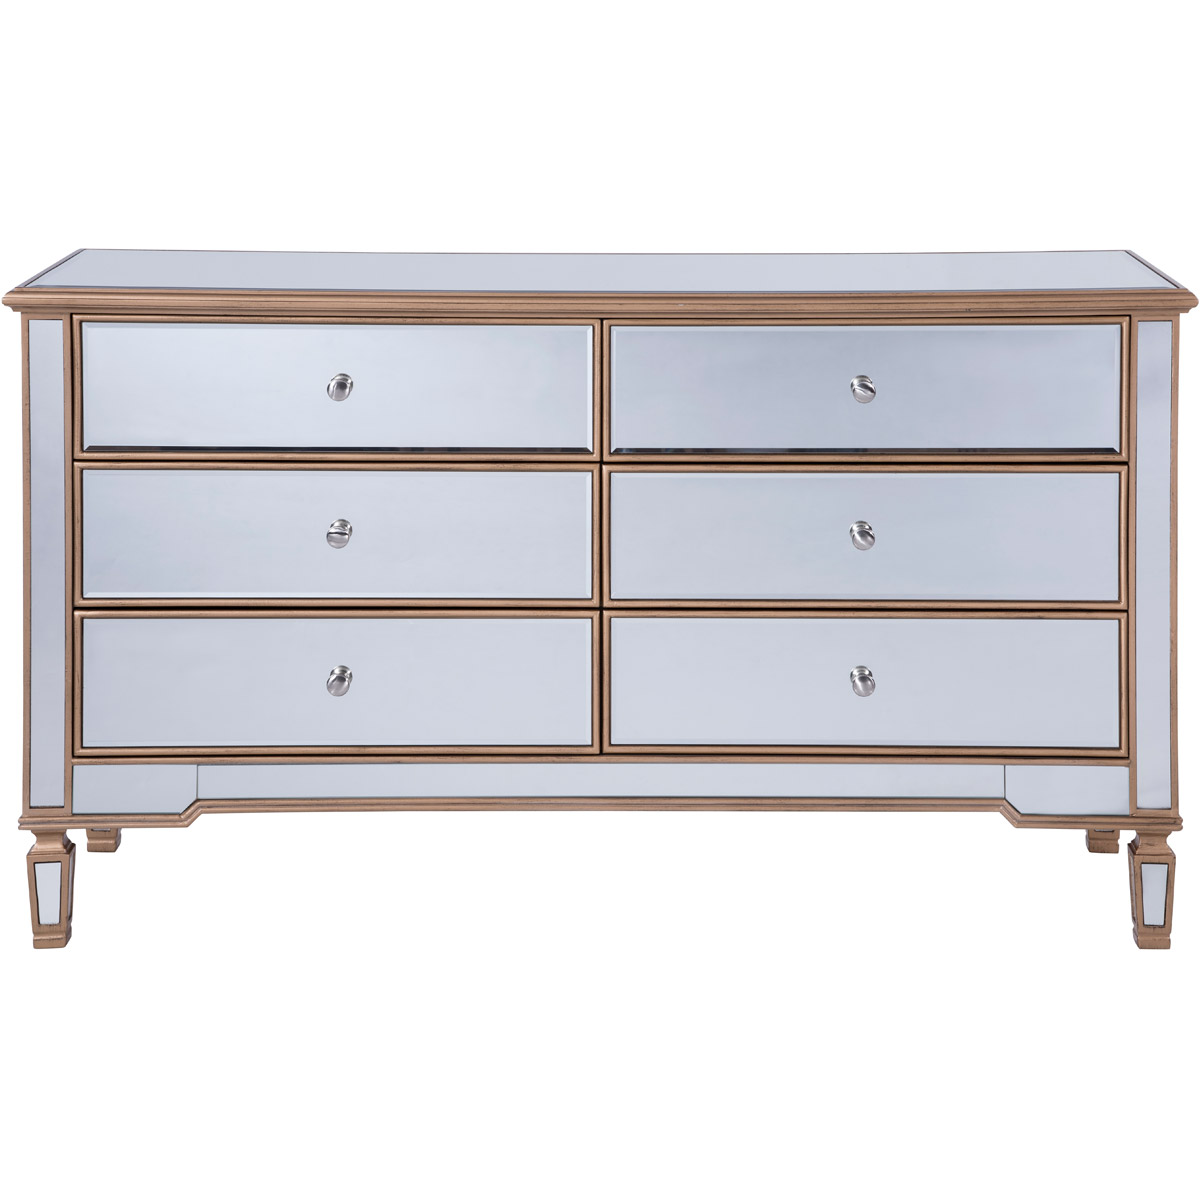 Mf6-1136g 6 Drawers Cabinet Gold Paint - Hand Rubbed, Antique Gold - 60 X 20 X 34 In.